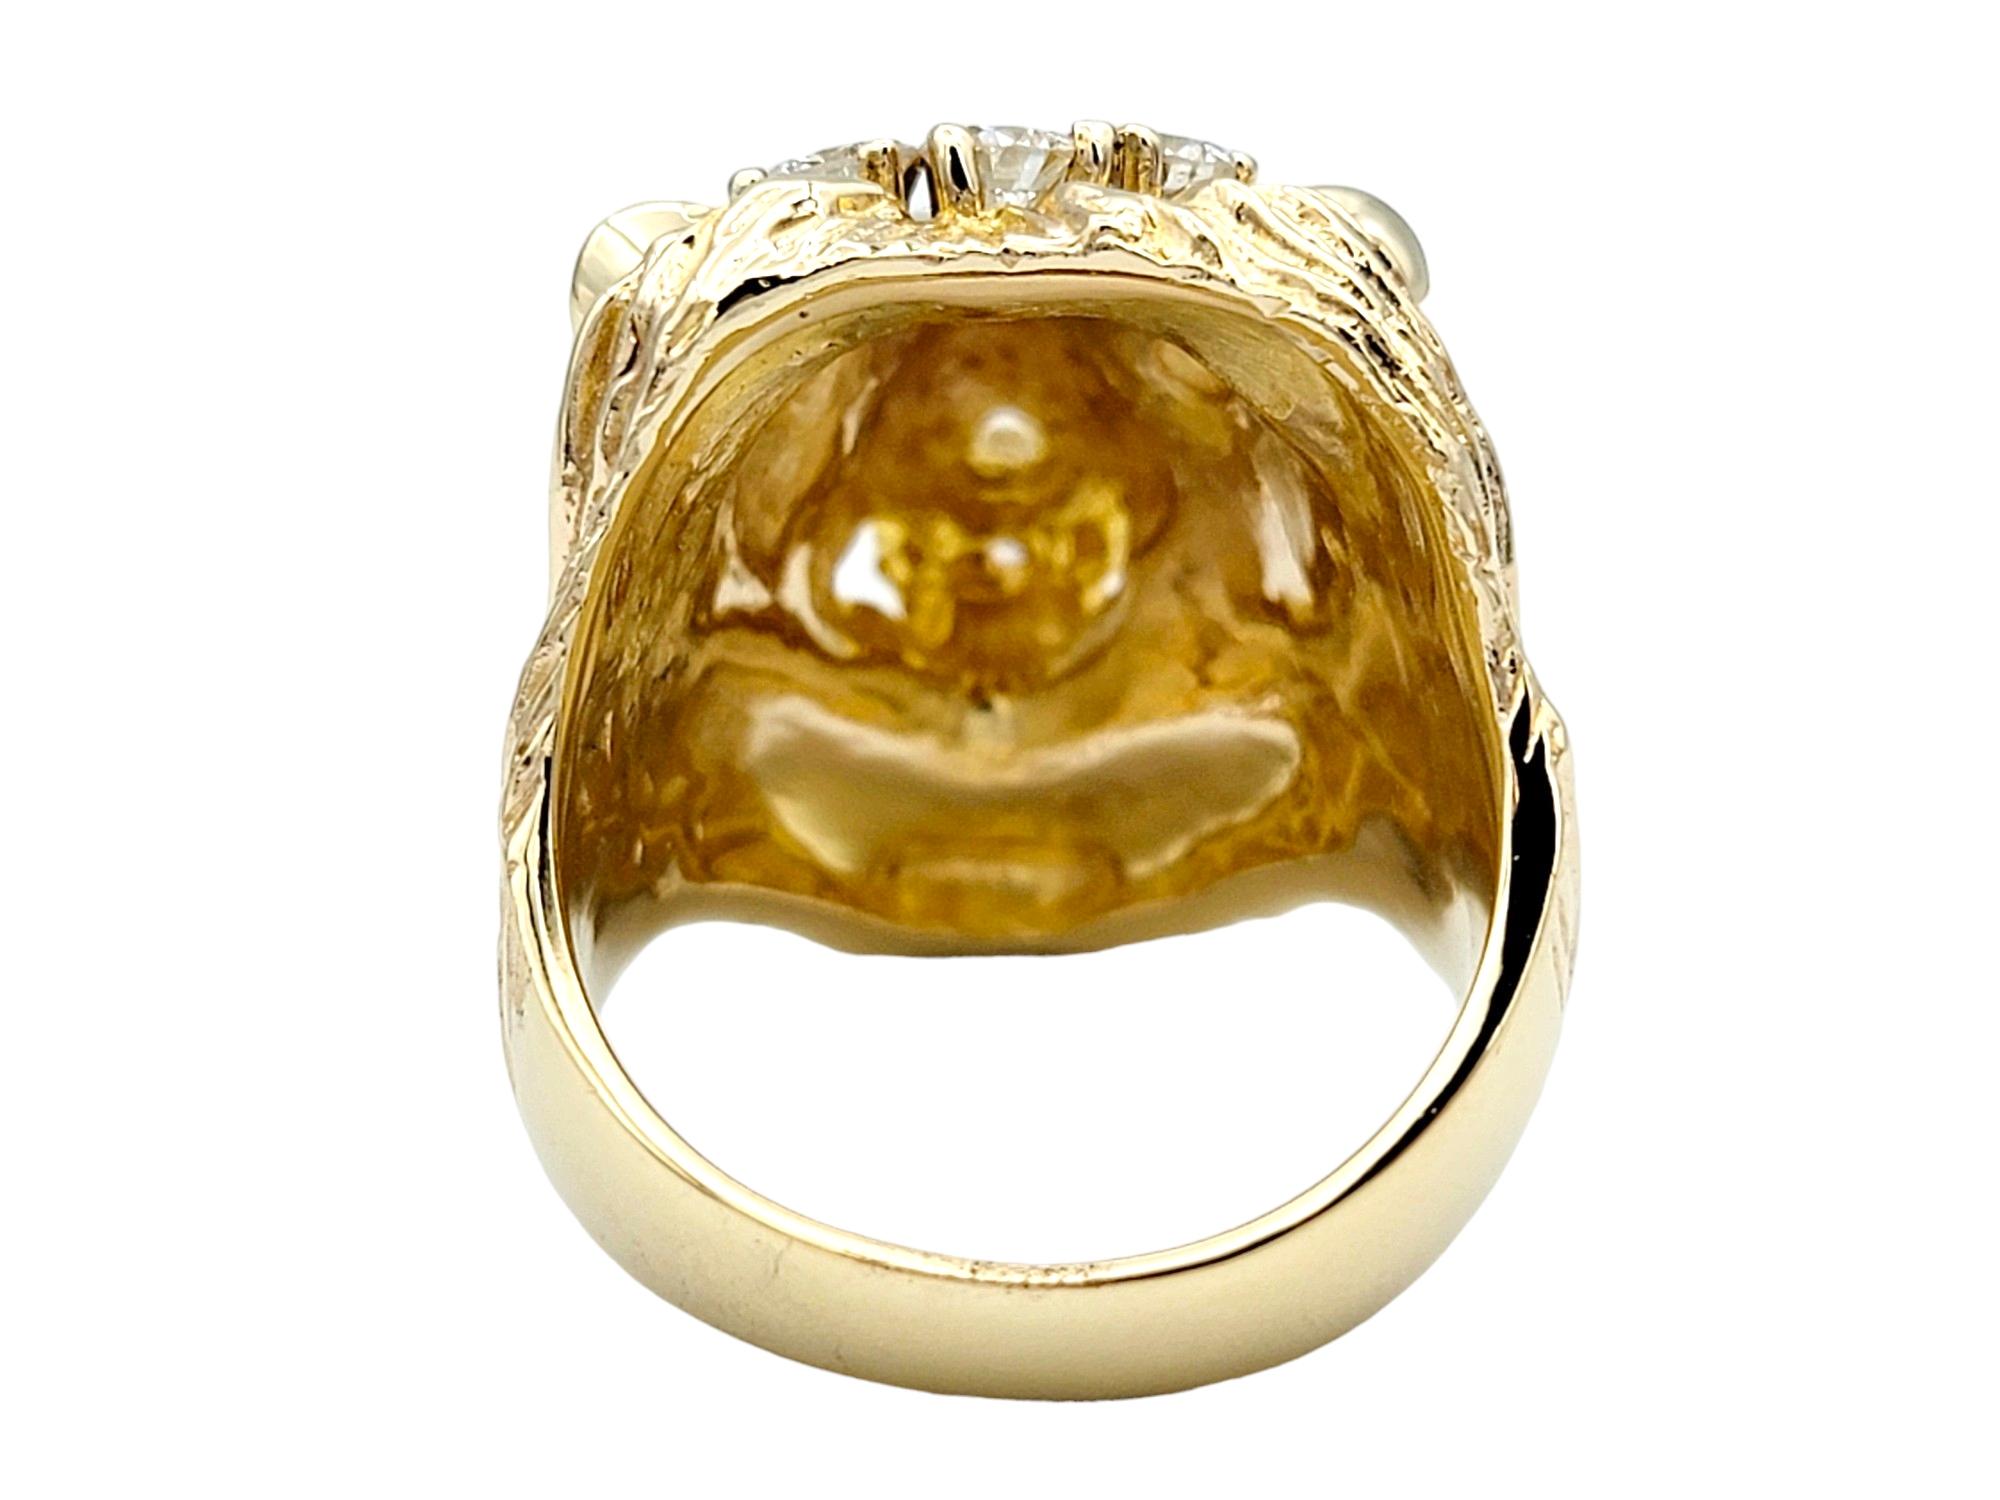 Carved 3D Lion Head with Diamond Accents Bold Ring Set in 14 Karat Yellow Gold In Excellent Condition For Sale In Scottsdale, AZ